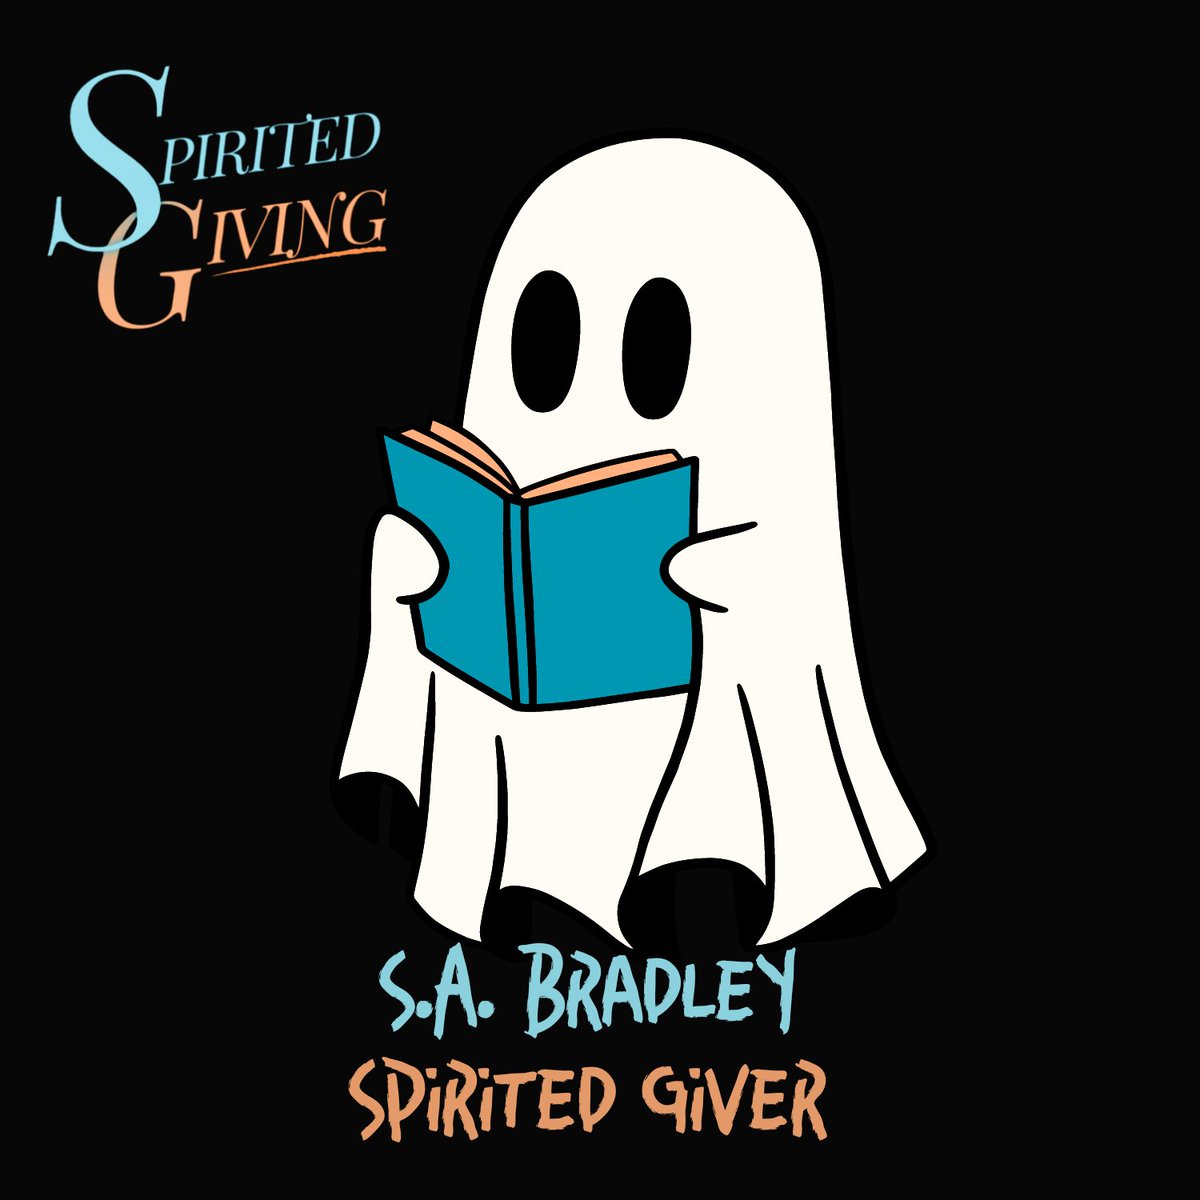 Become an Individual Sponsor for Spirited Giving! $50 helps us a lot and gets you recognition on social media, the website, any program we might make, etc. DM me for info or click here and I'll send a follow up email bit.ly/SpiritedGiver #horror #fundraiser #horrorcommunity